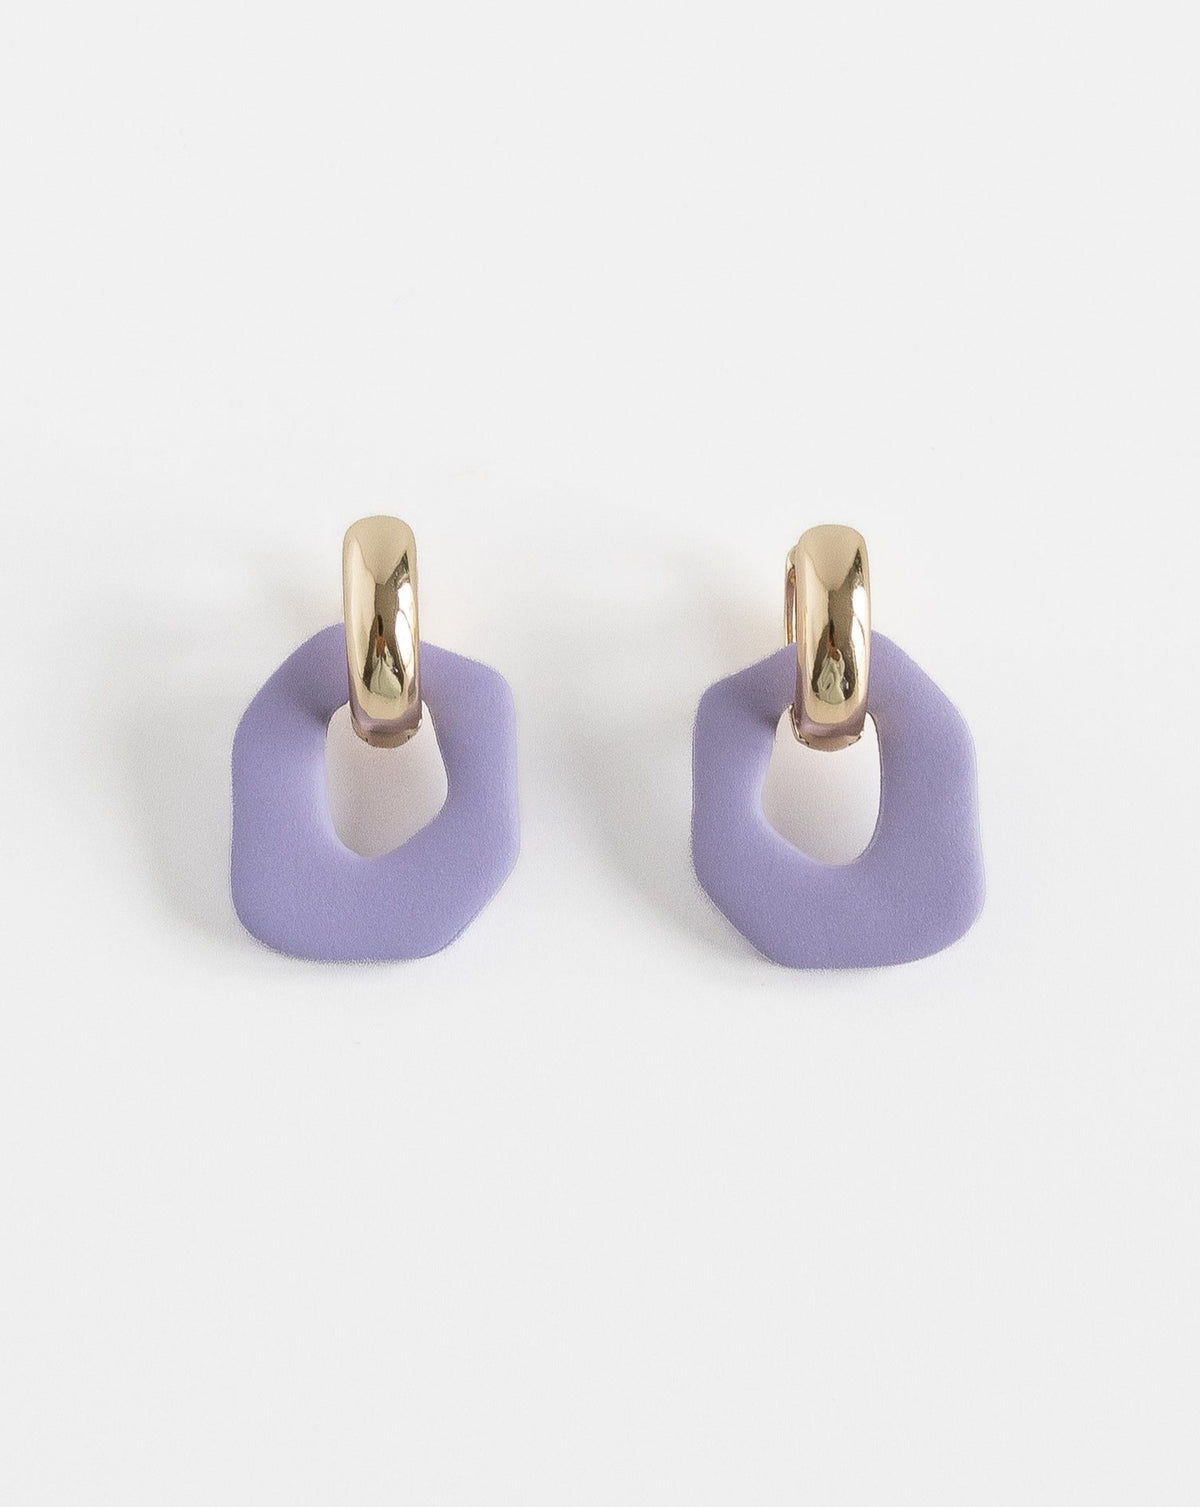 Darien earrings in Lilac color with gold hoops, front view